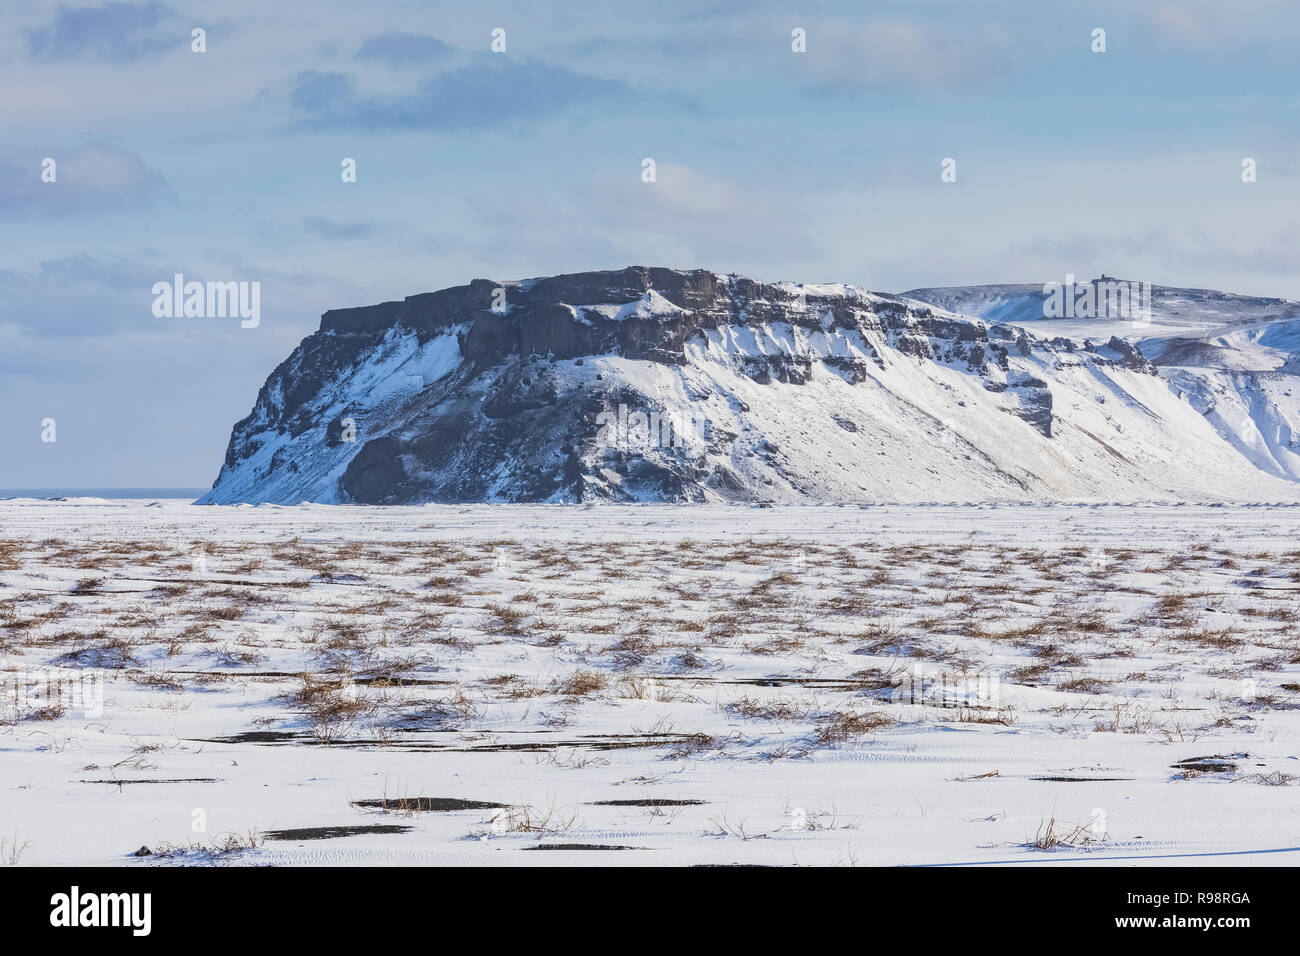 Mýrdalssandur outwash plain near Mýrdalsjökull Glacier with Hafursey mountain, where part of Rogue One: A Star Wars Story was filmed, Iceland, in wint Stock Photo